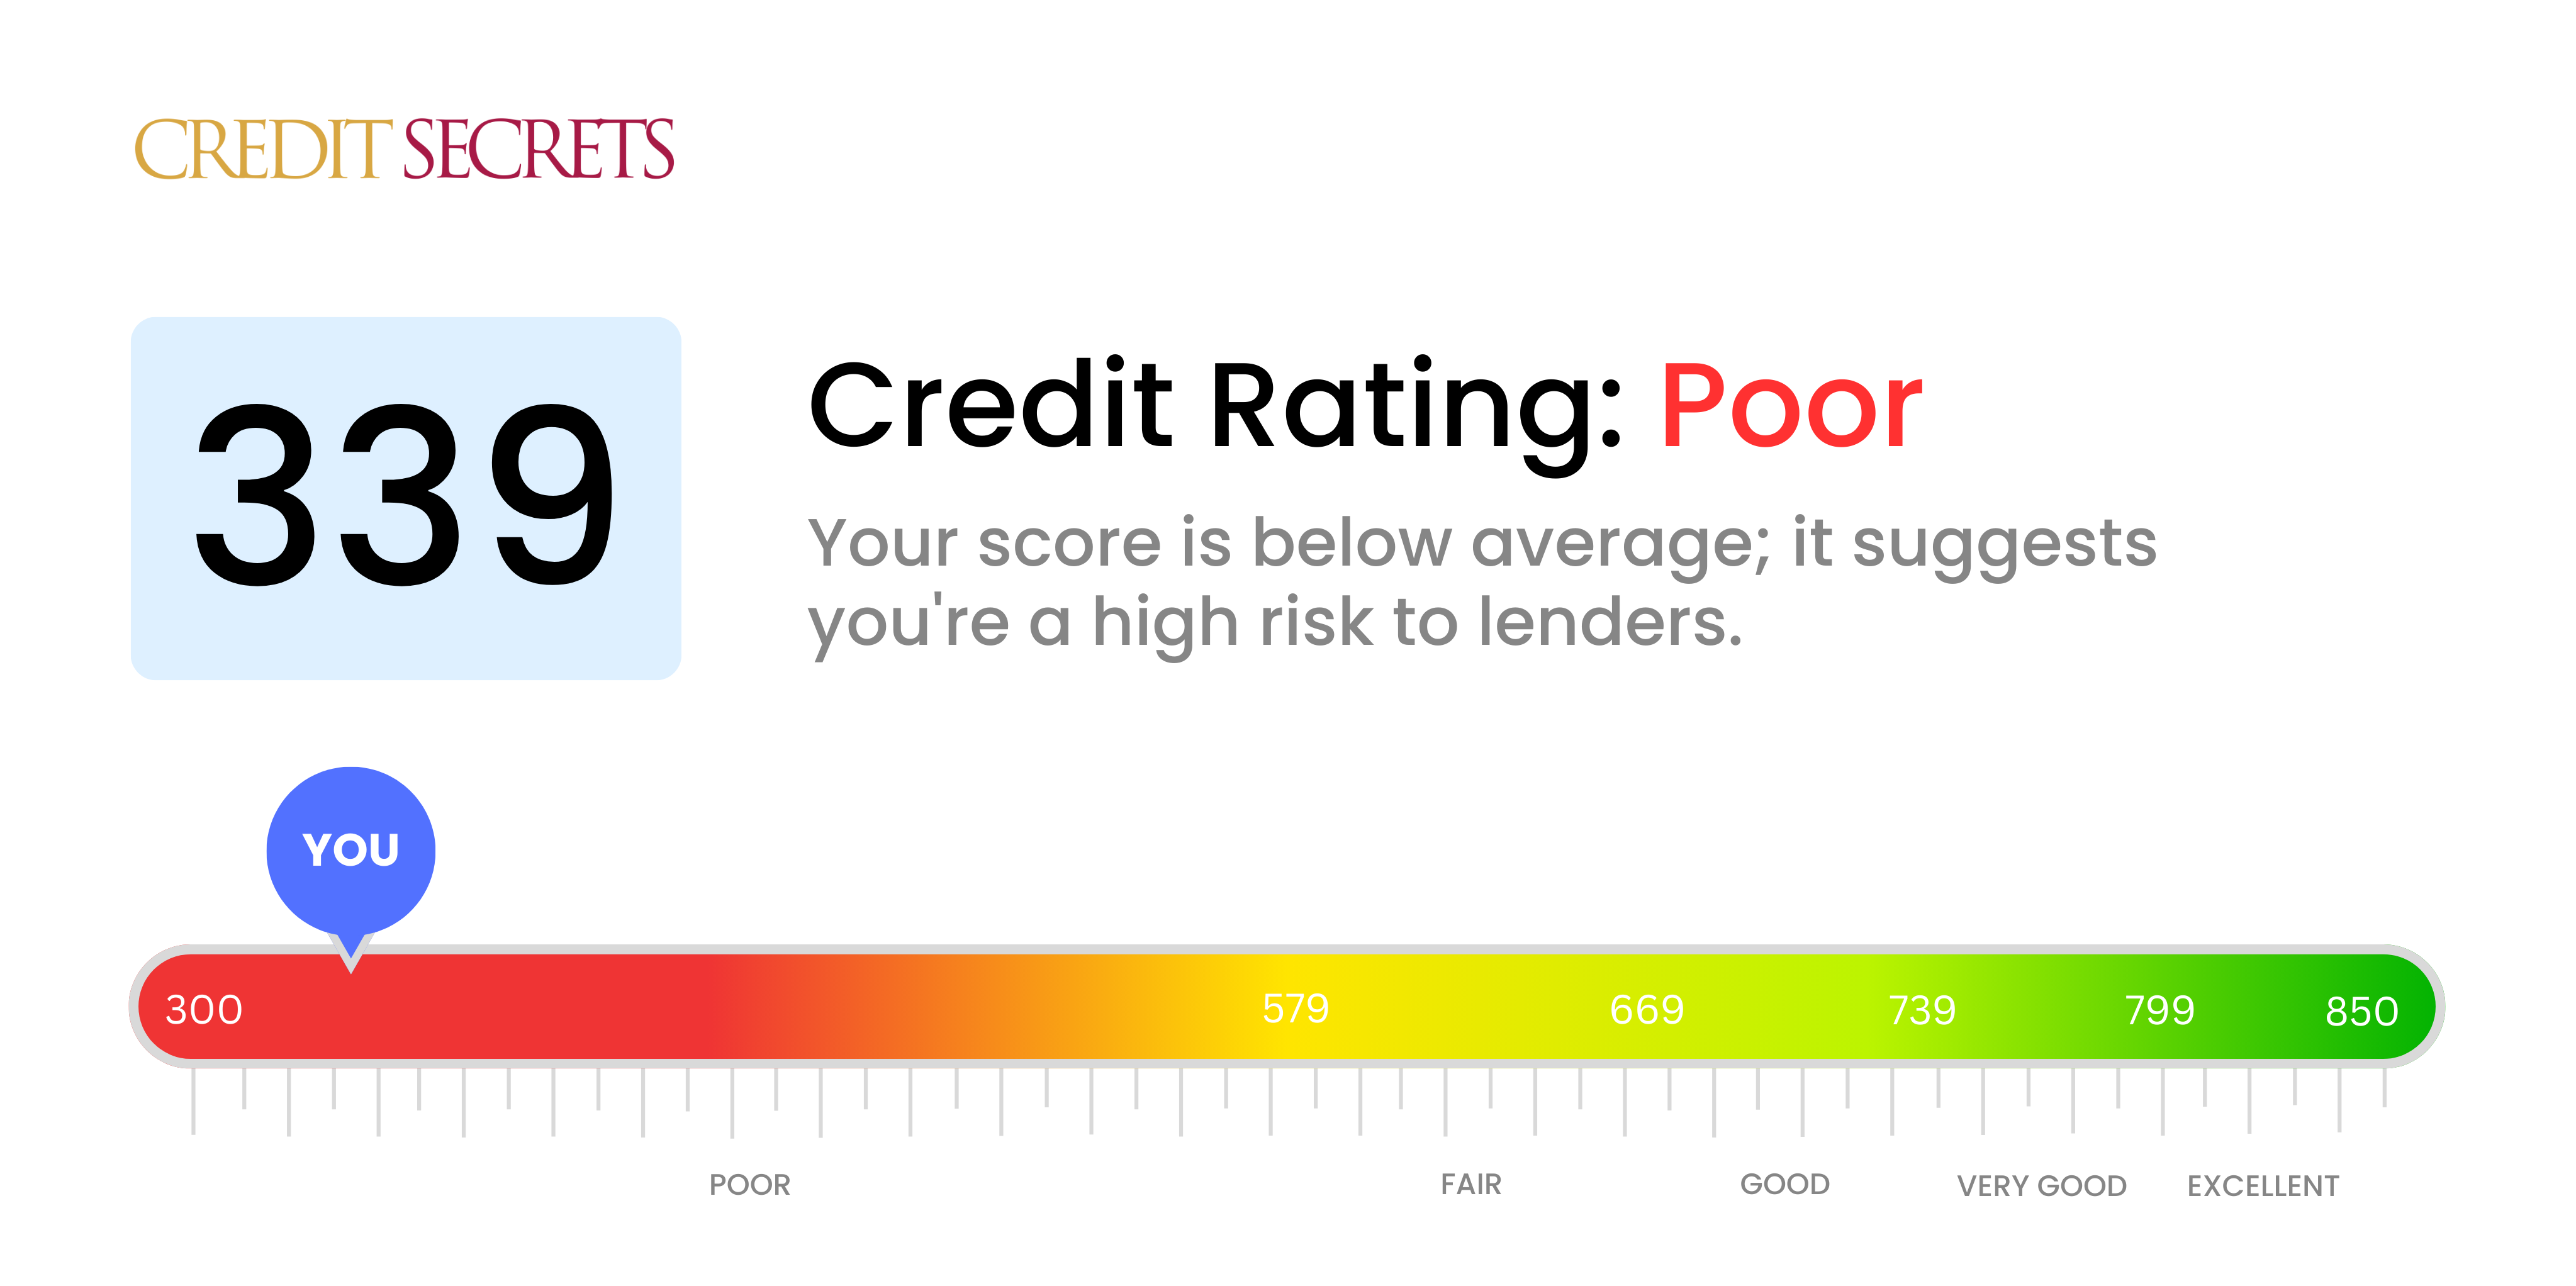 Is 339 a good credit score?